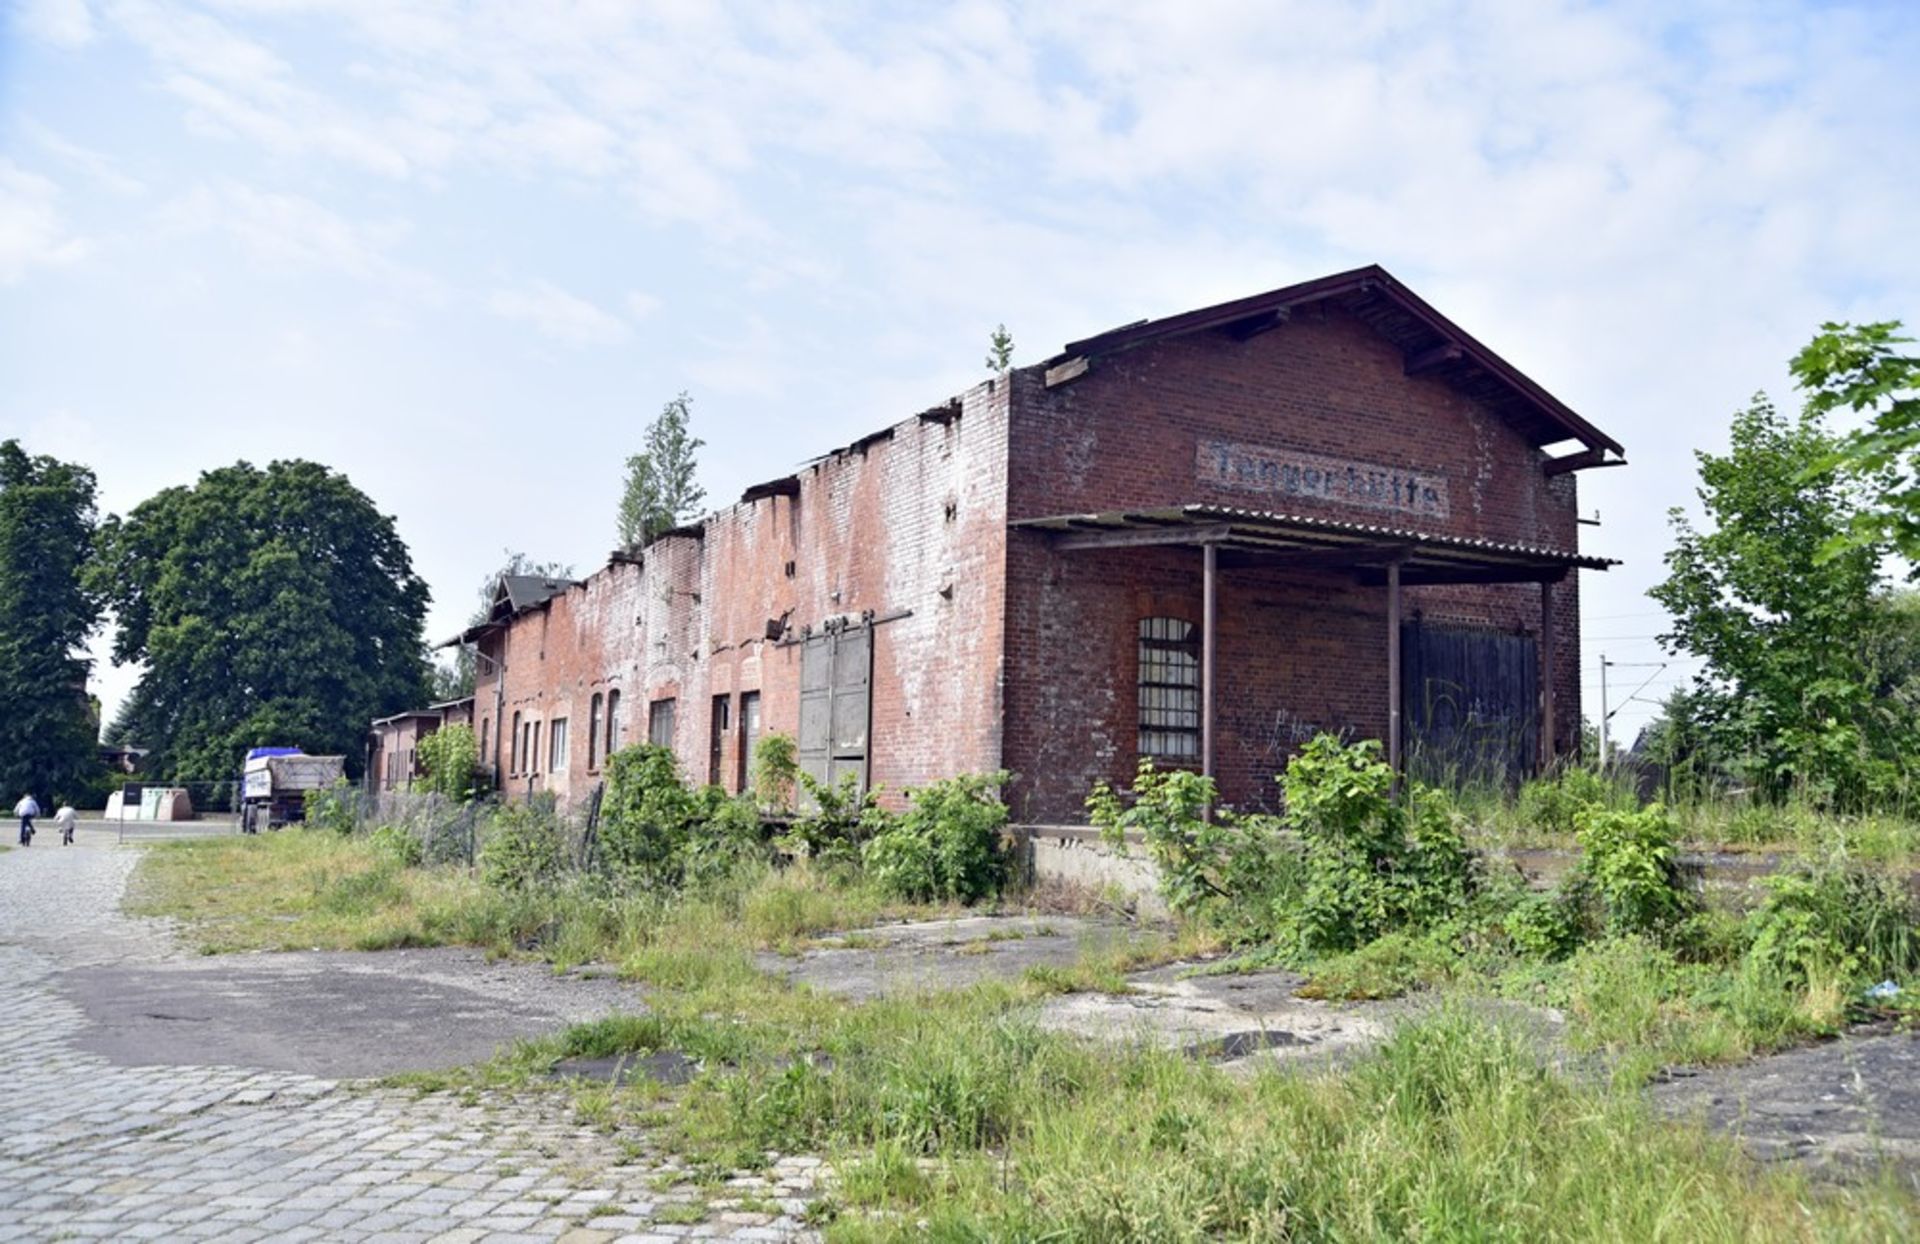 STATION HOUSE, GOODS SHED, OVER ONE ACRE Tangerhütte, Saxony, Germany, - Image 97 of 98